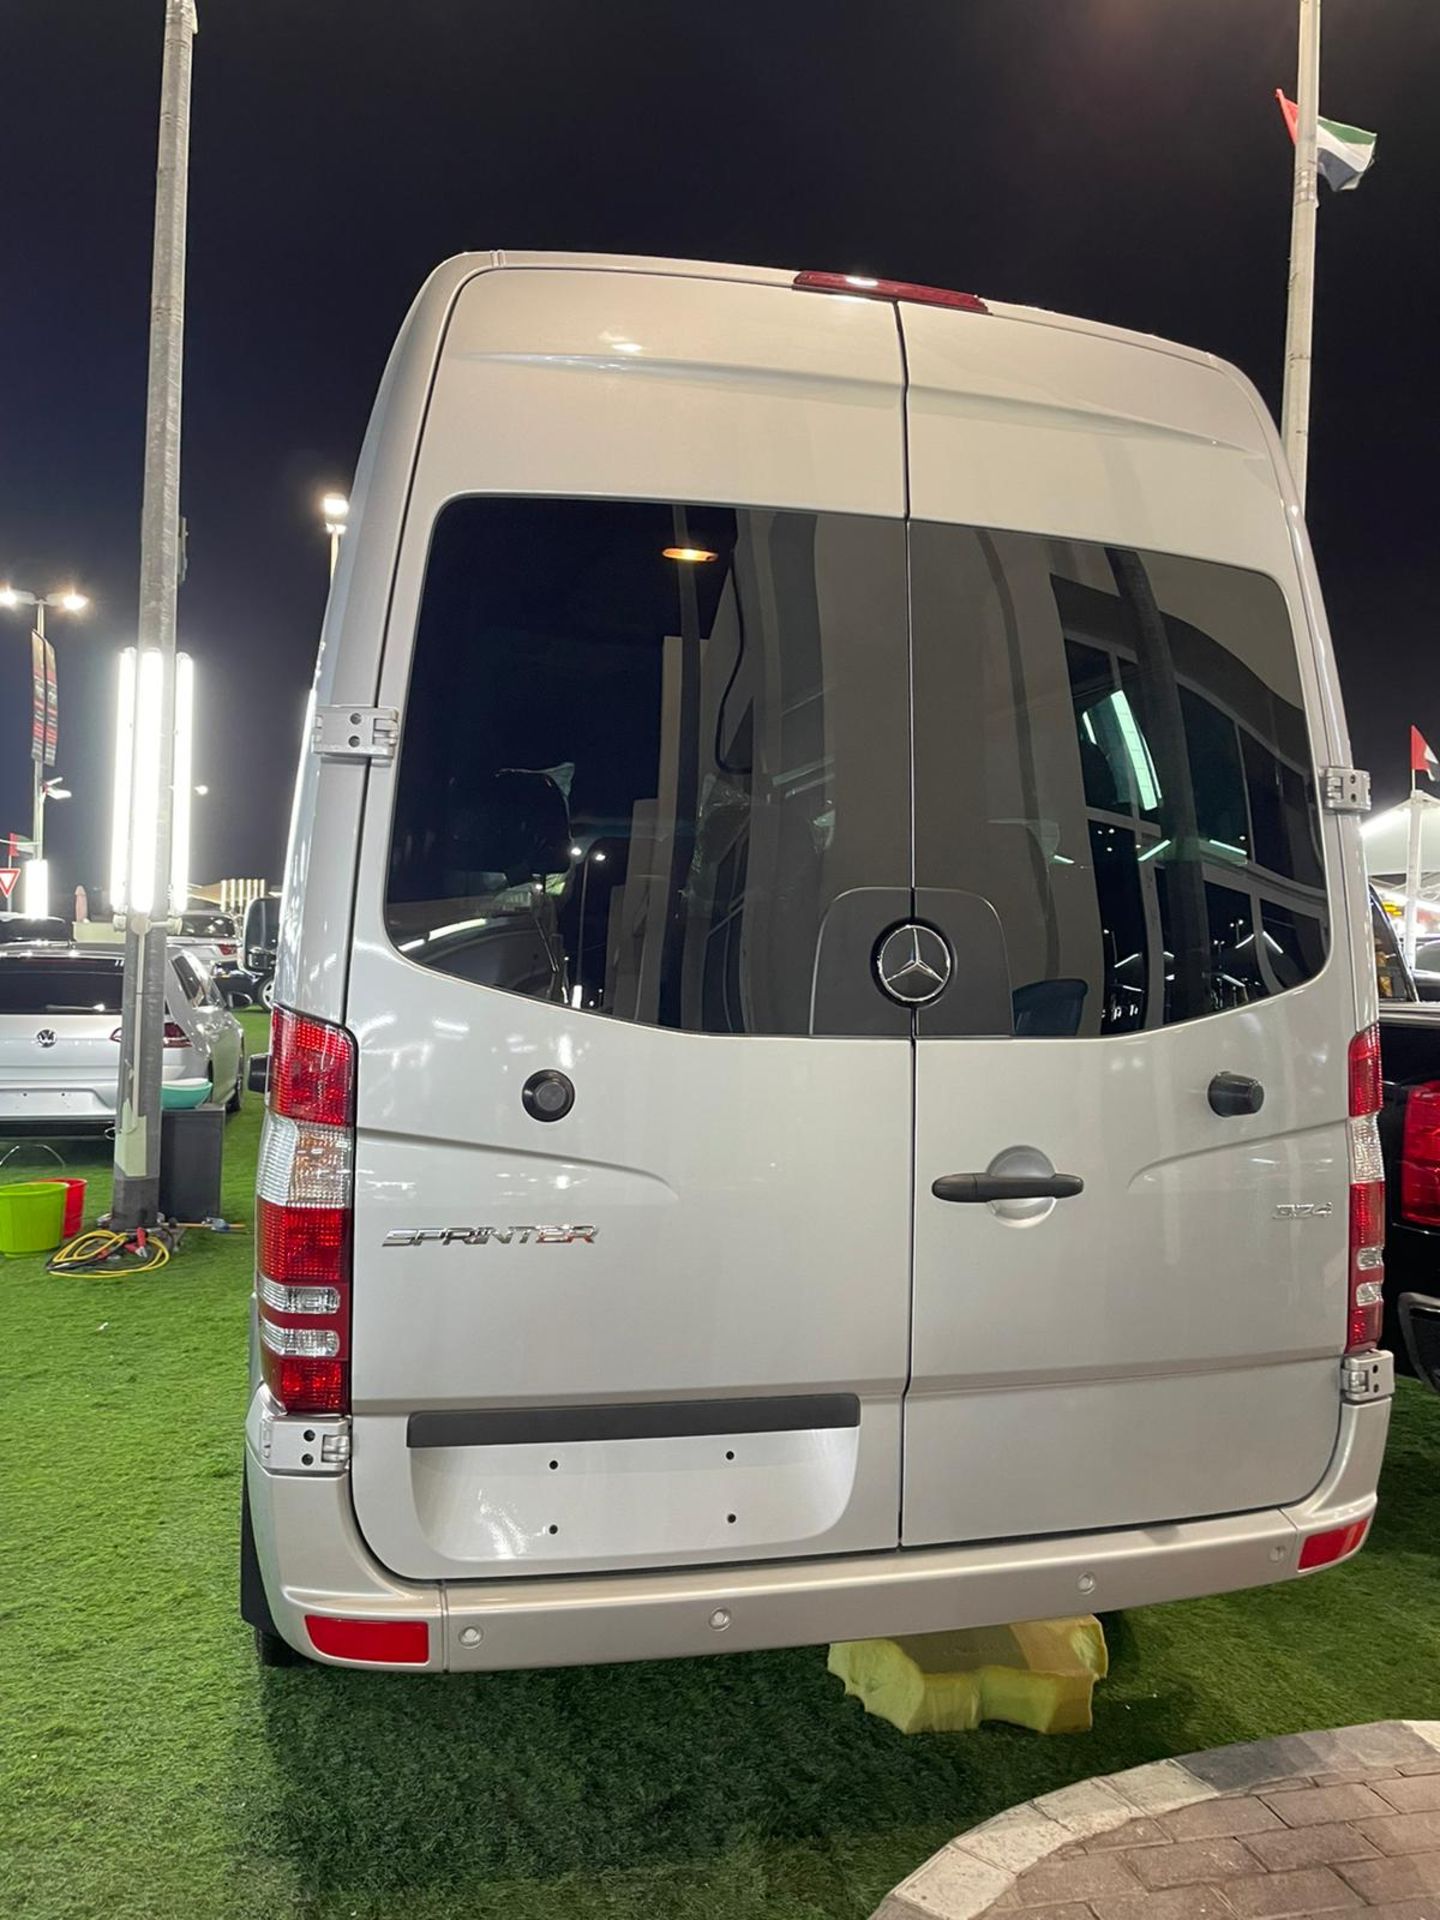 2016 Mercedes 324 sprinter luxury - 11,000km only electric doors - with nova or can sell vat free. - Image 4 of 11